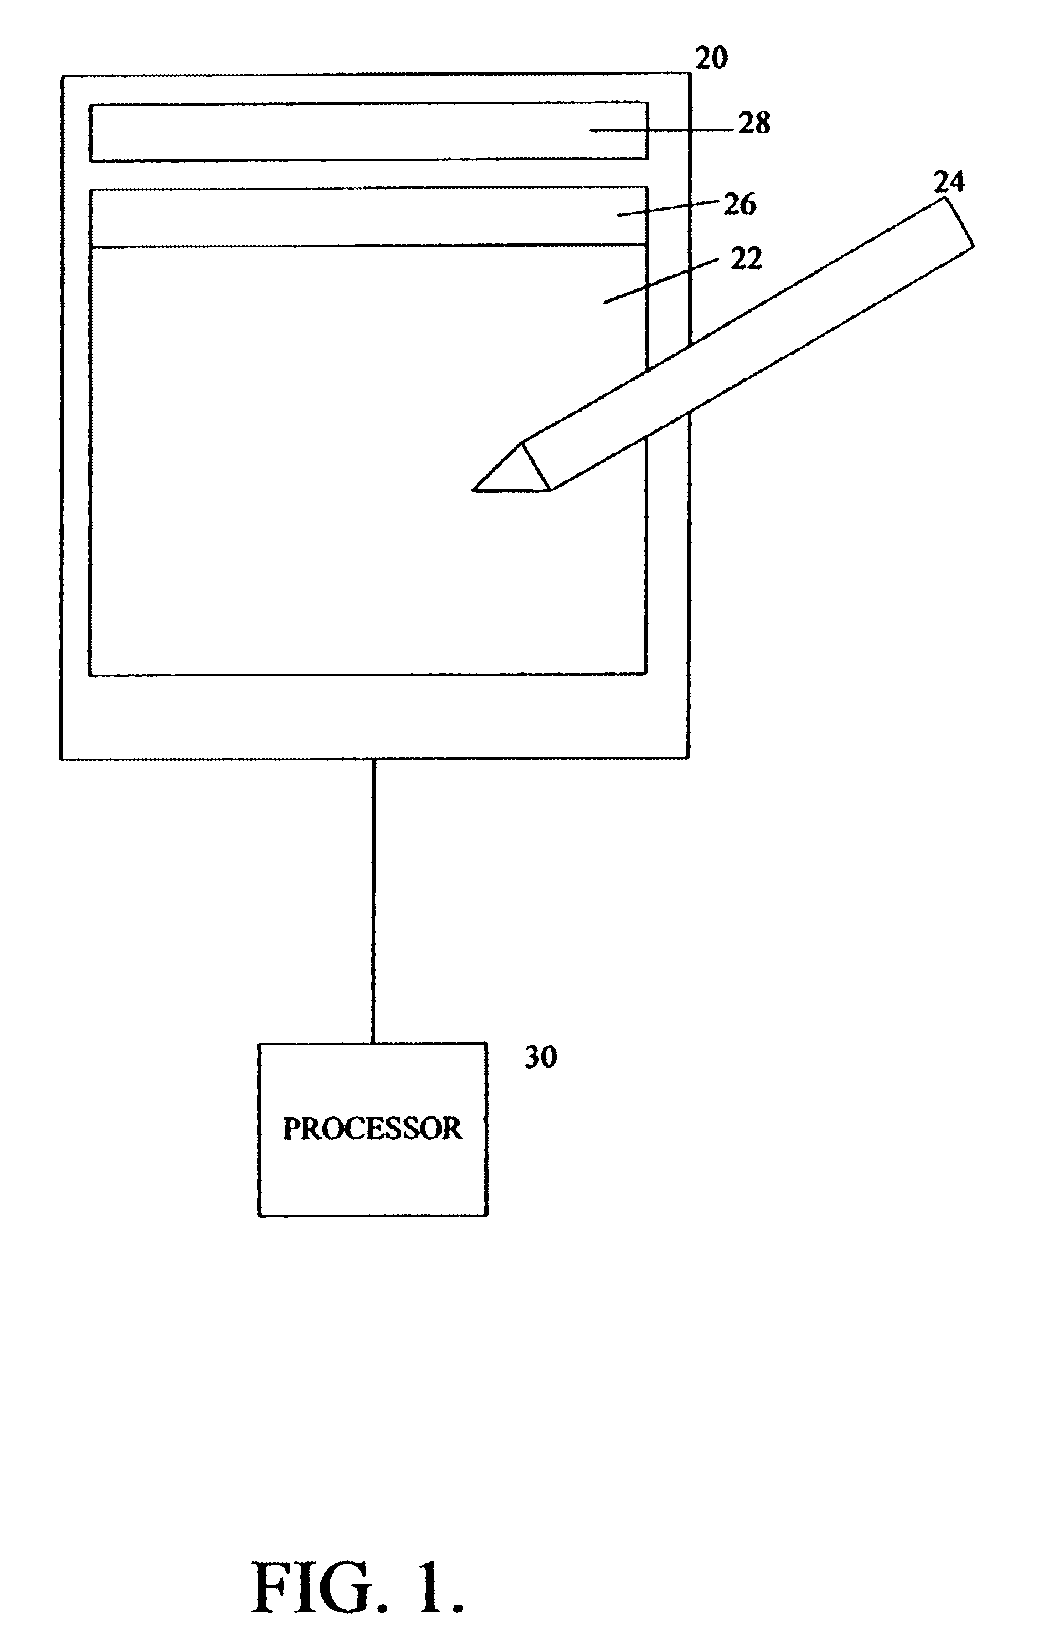 Chinese character handwriting recognition system